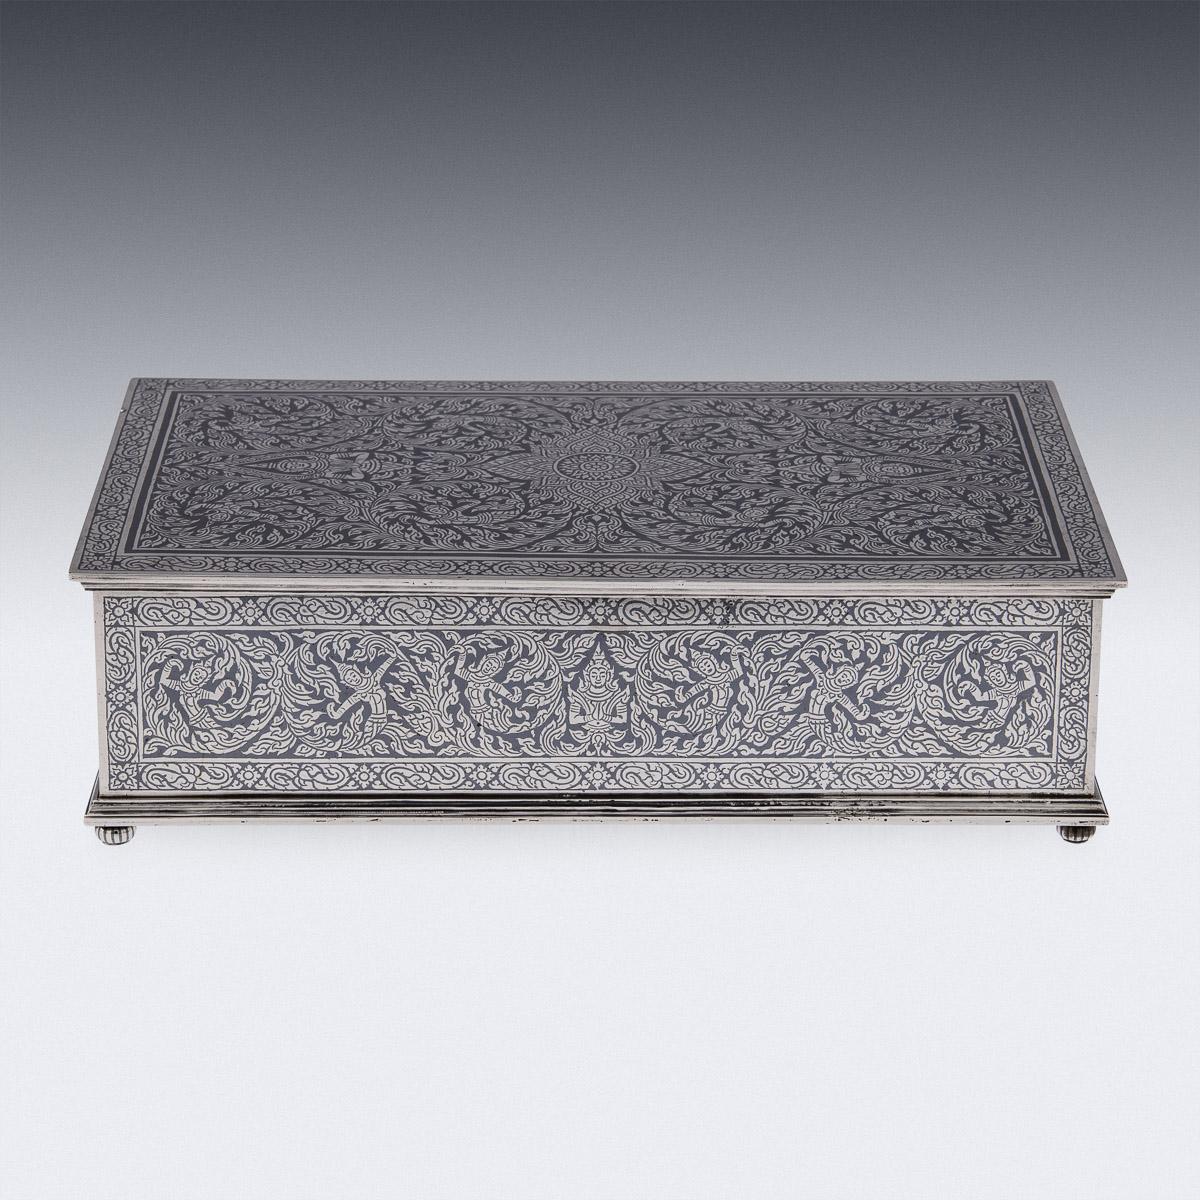 20th Century Thai silver niello presentation casket, of traditional form, decorated throughout with stylised leaves and deities on polished ground. Tested Sterling (925+ standard), Makers Unknown, probably made in Bangkok.

Condition
In great